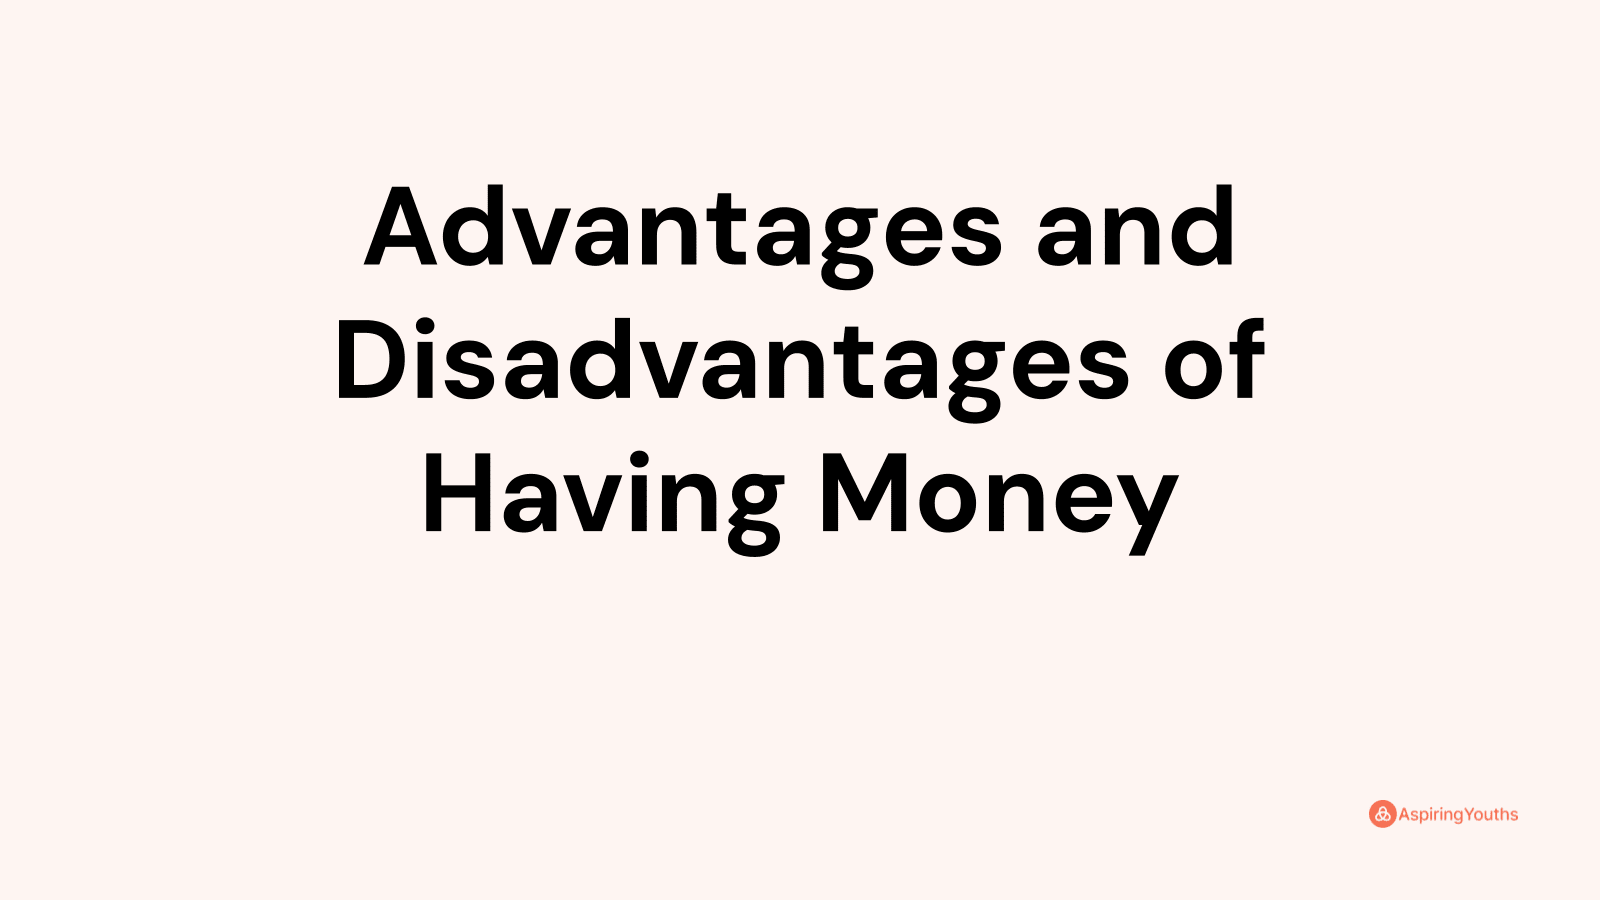 Advantages and disadvantages of Having Money